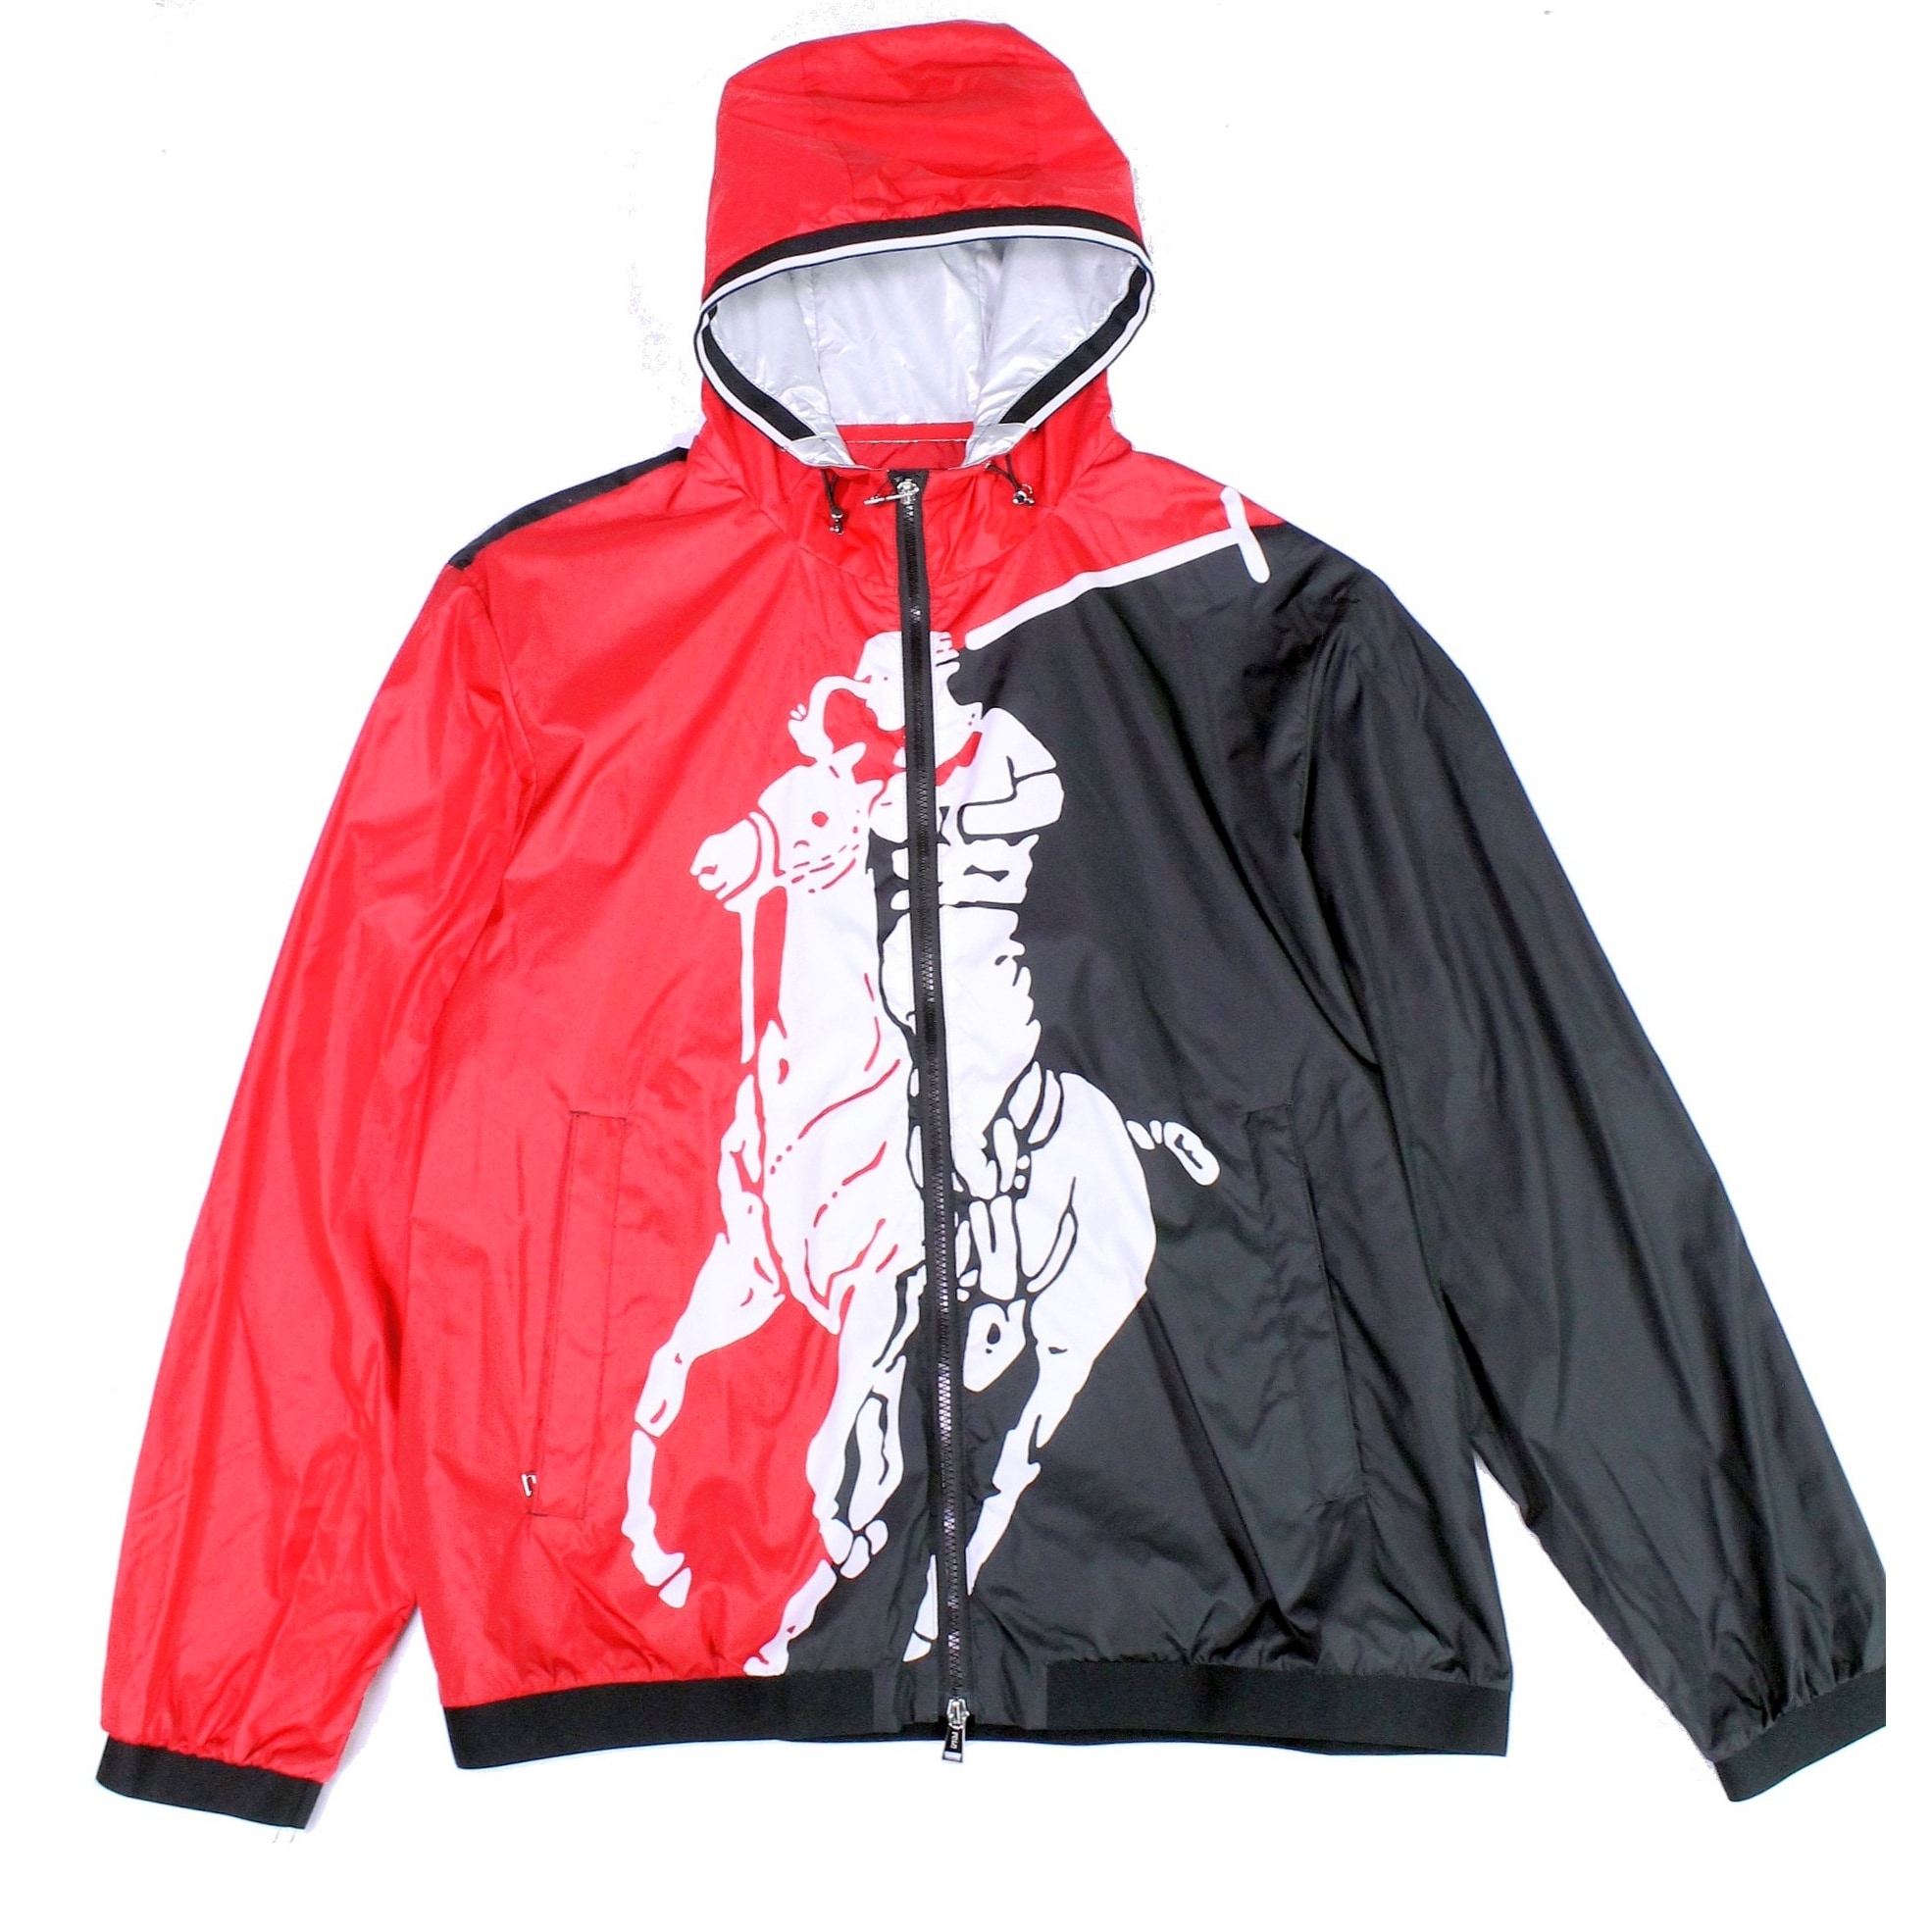 polo ralph lauren red and black jacket